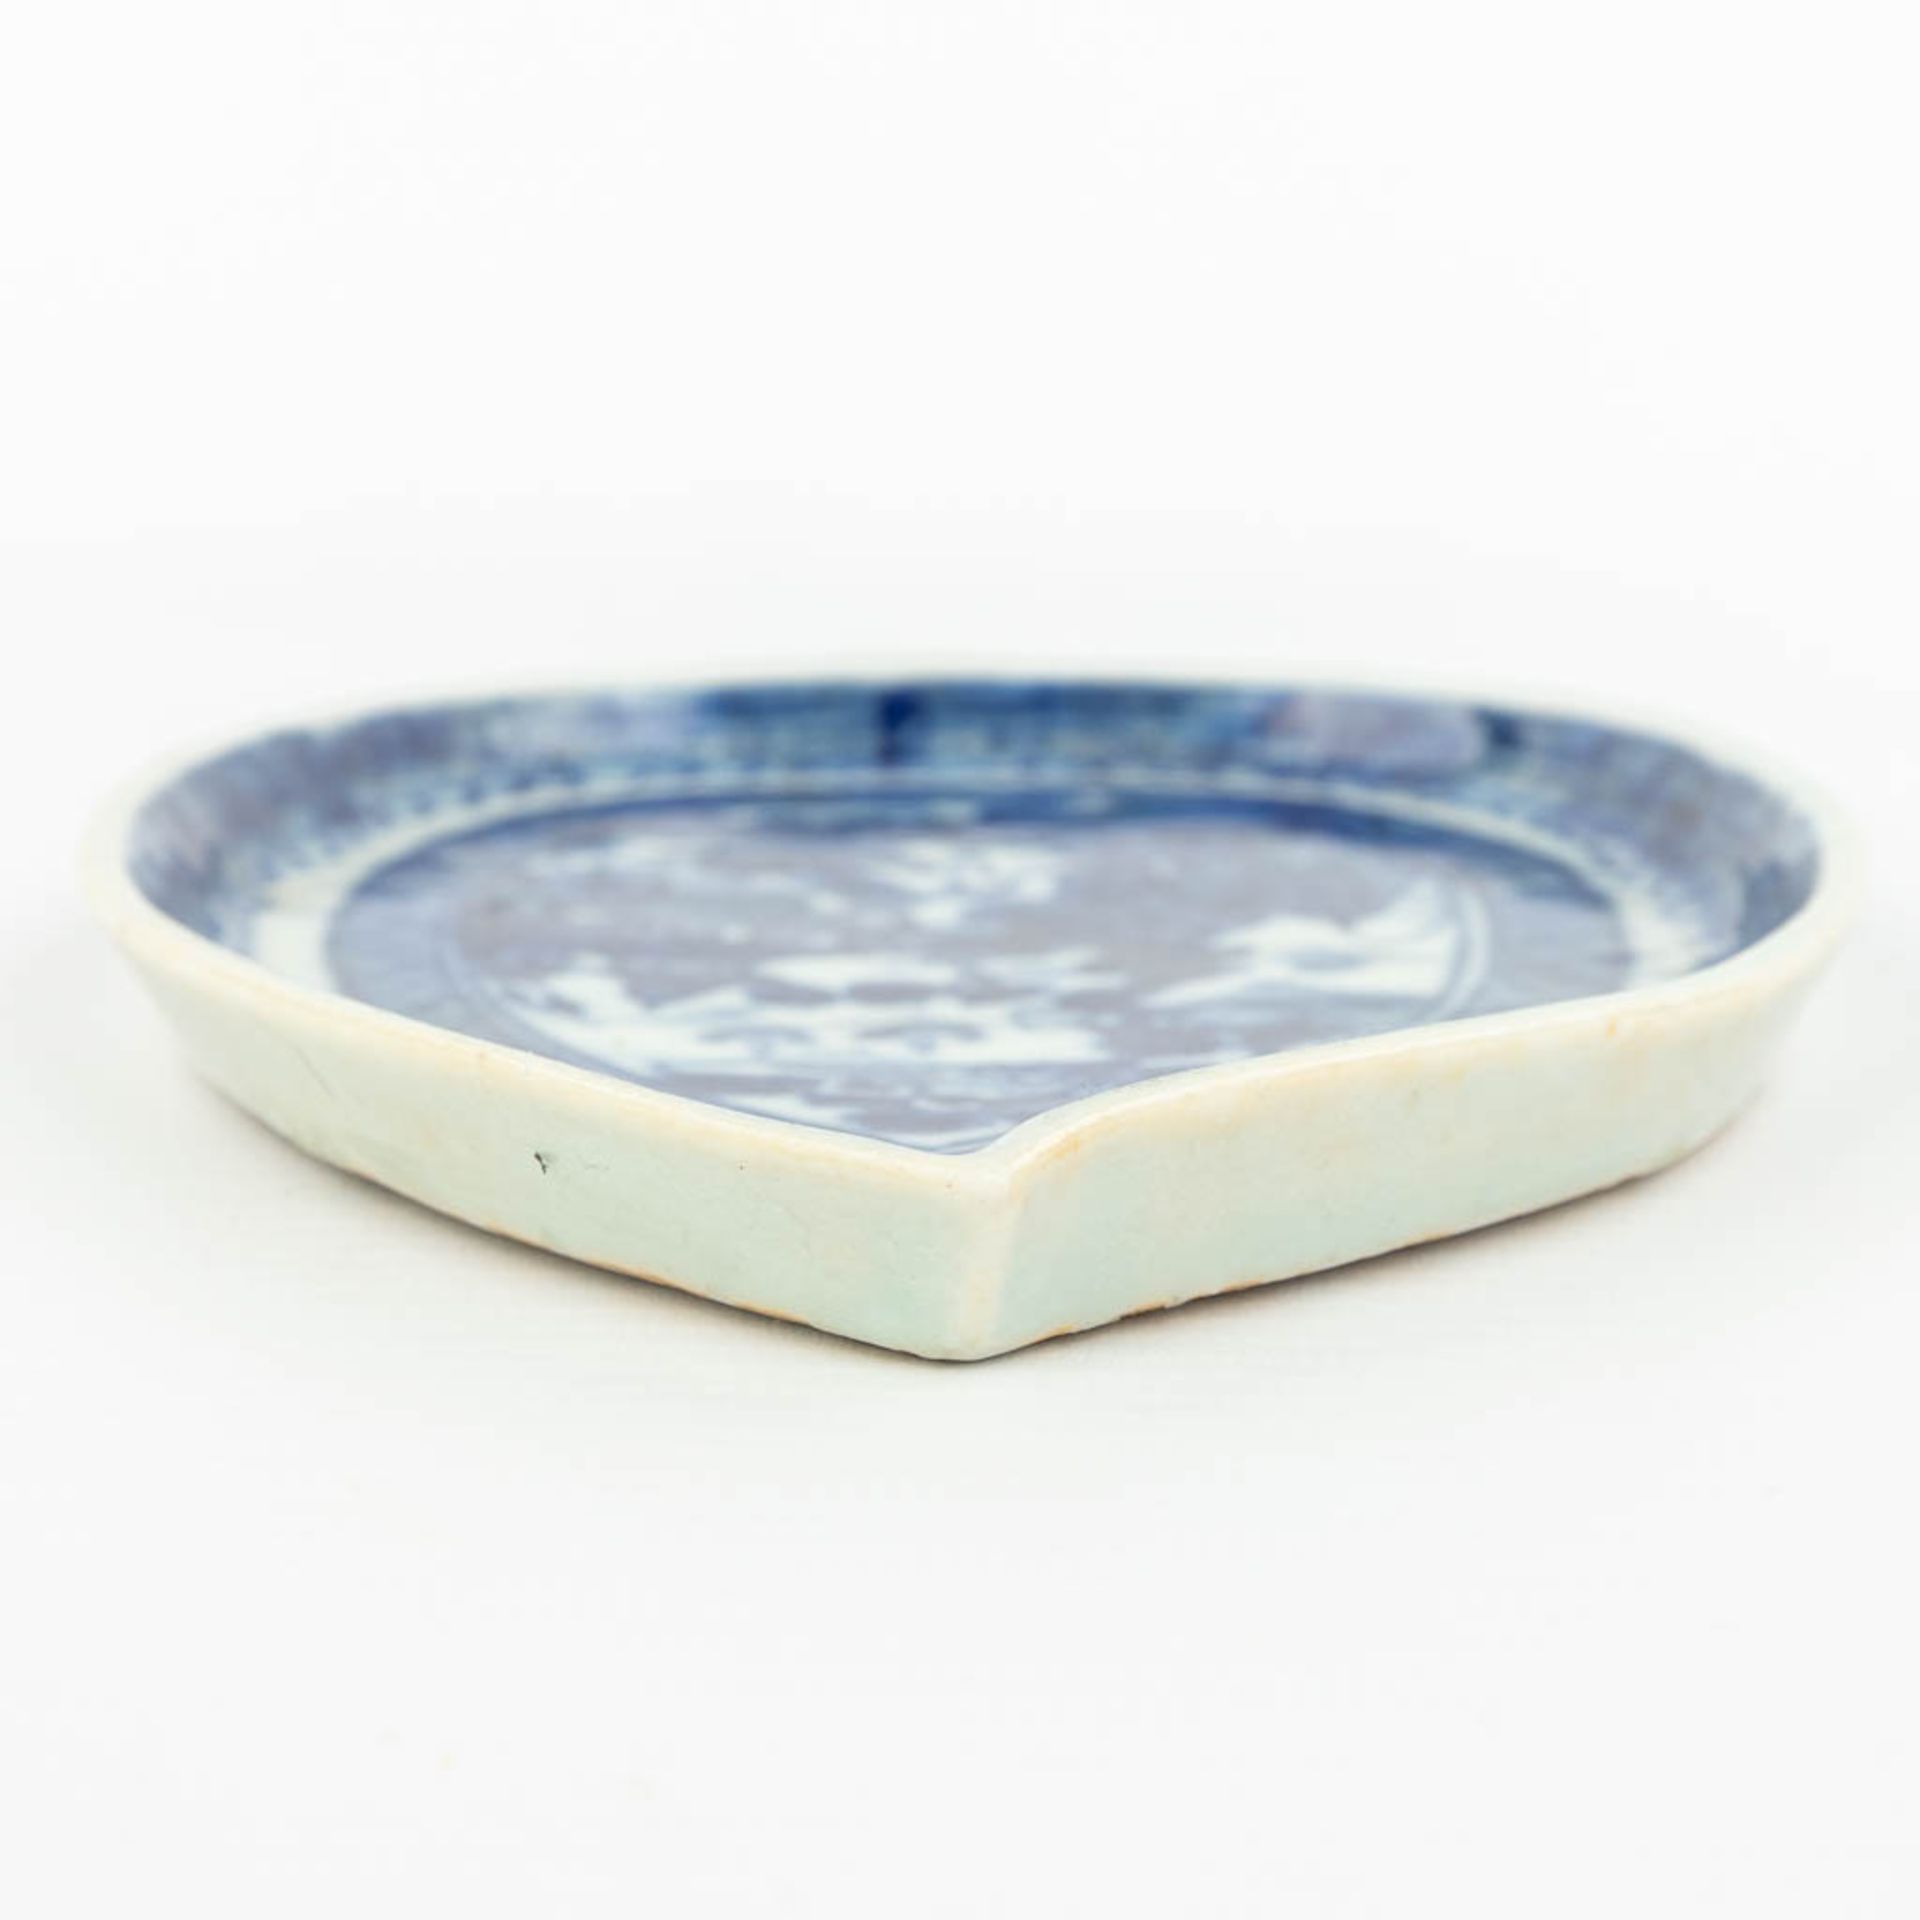 A Chinese dish made of porcelain with a blue-white landscape decor. - Image 2 of 10